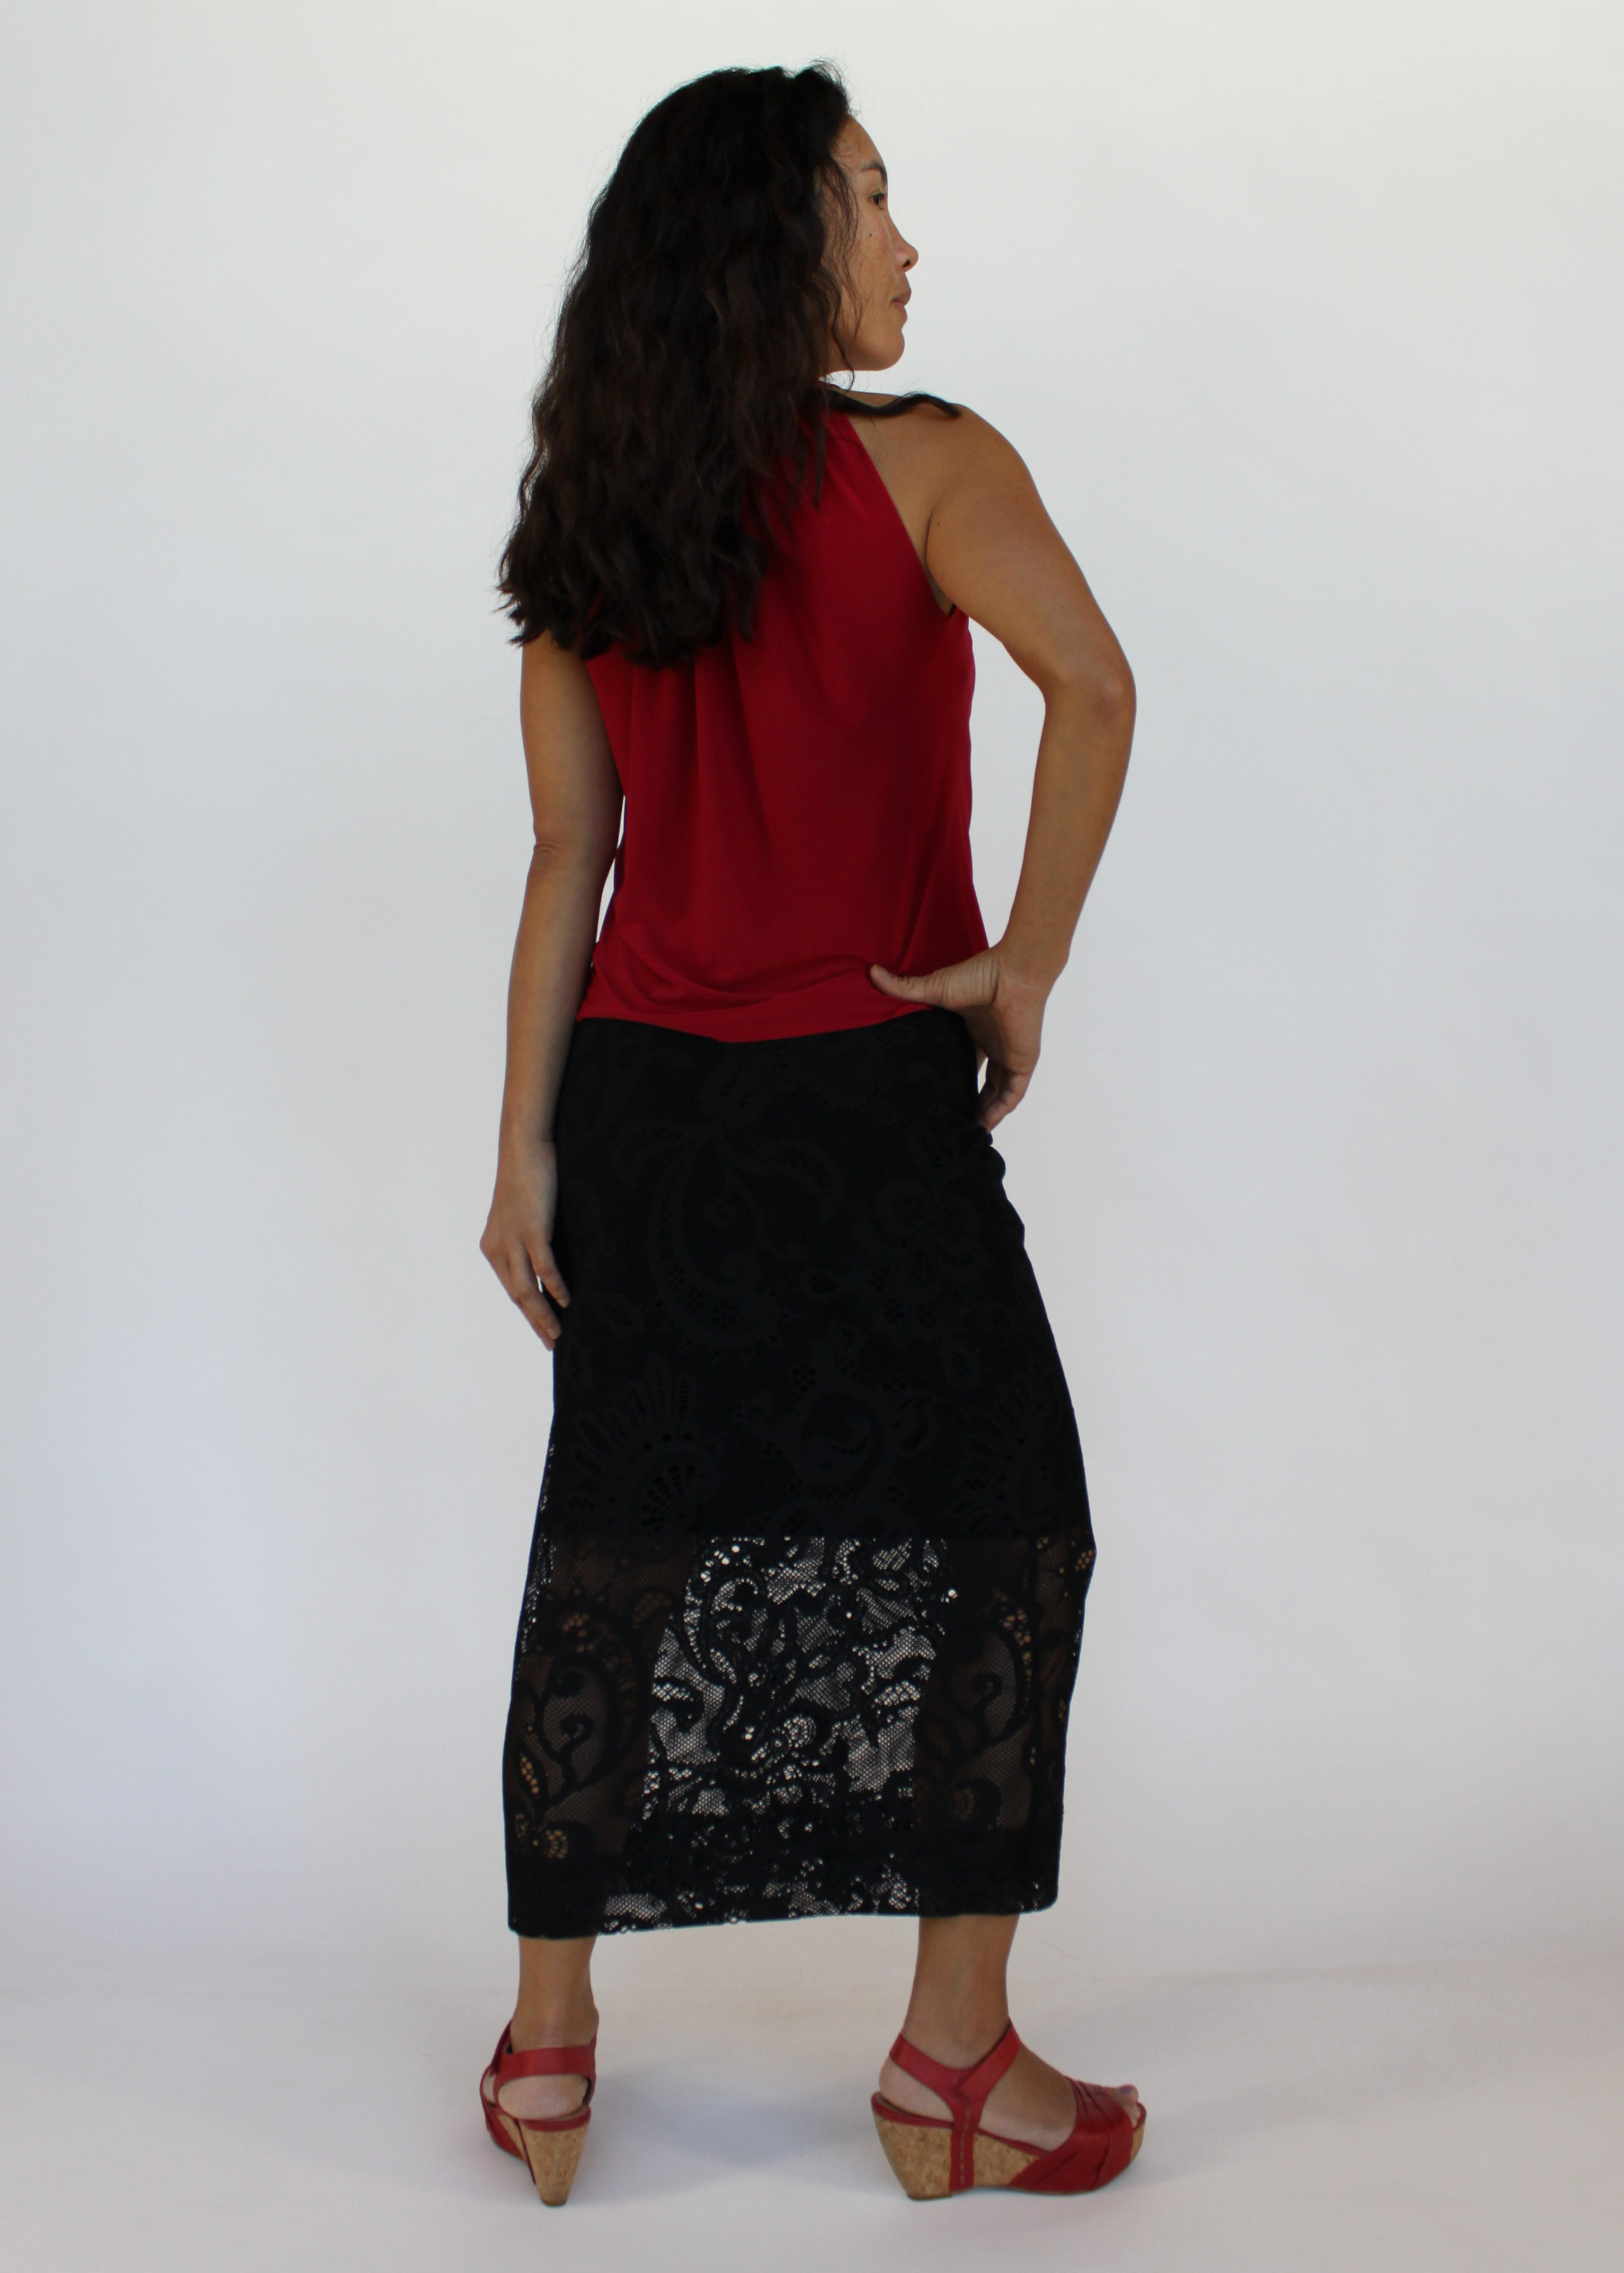 stretch lace skirt